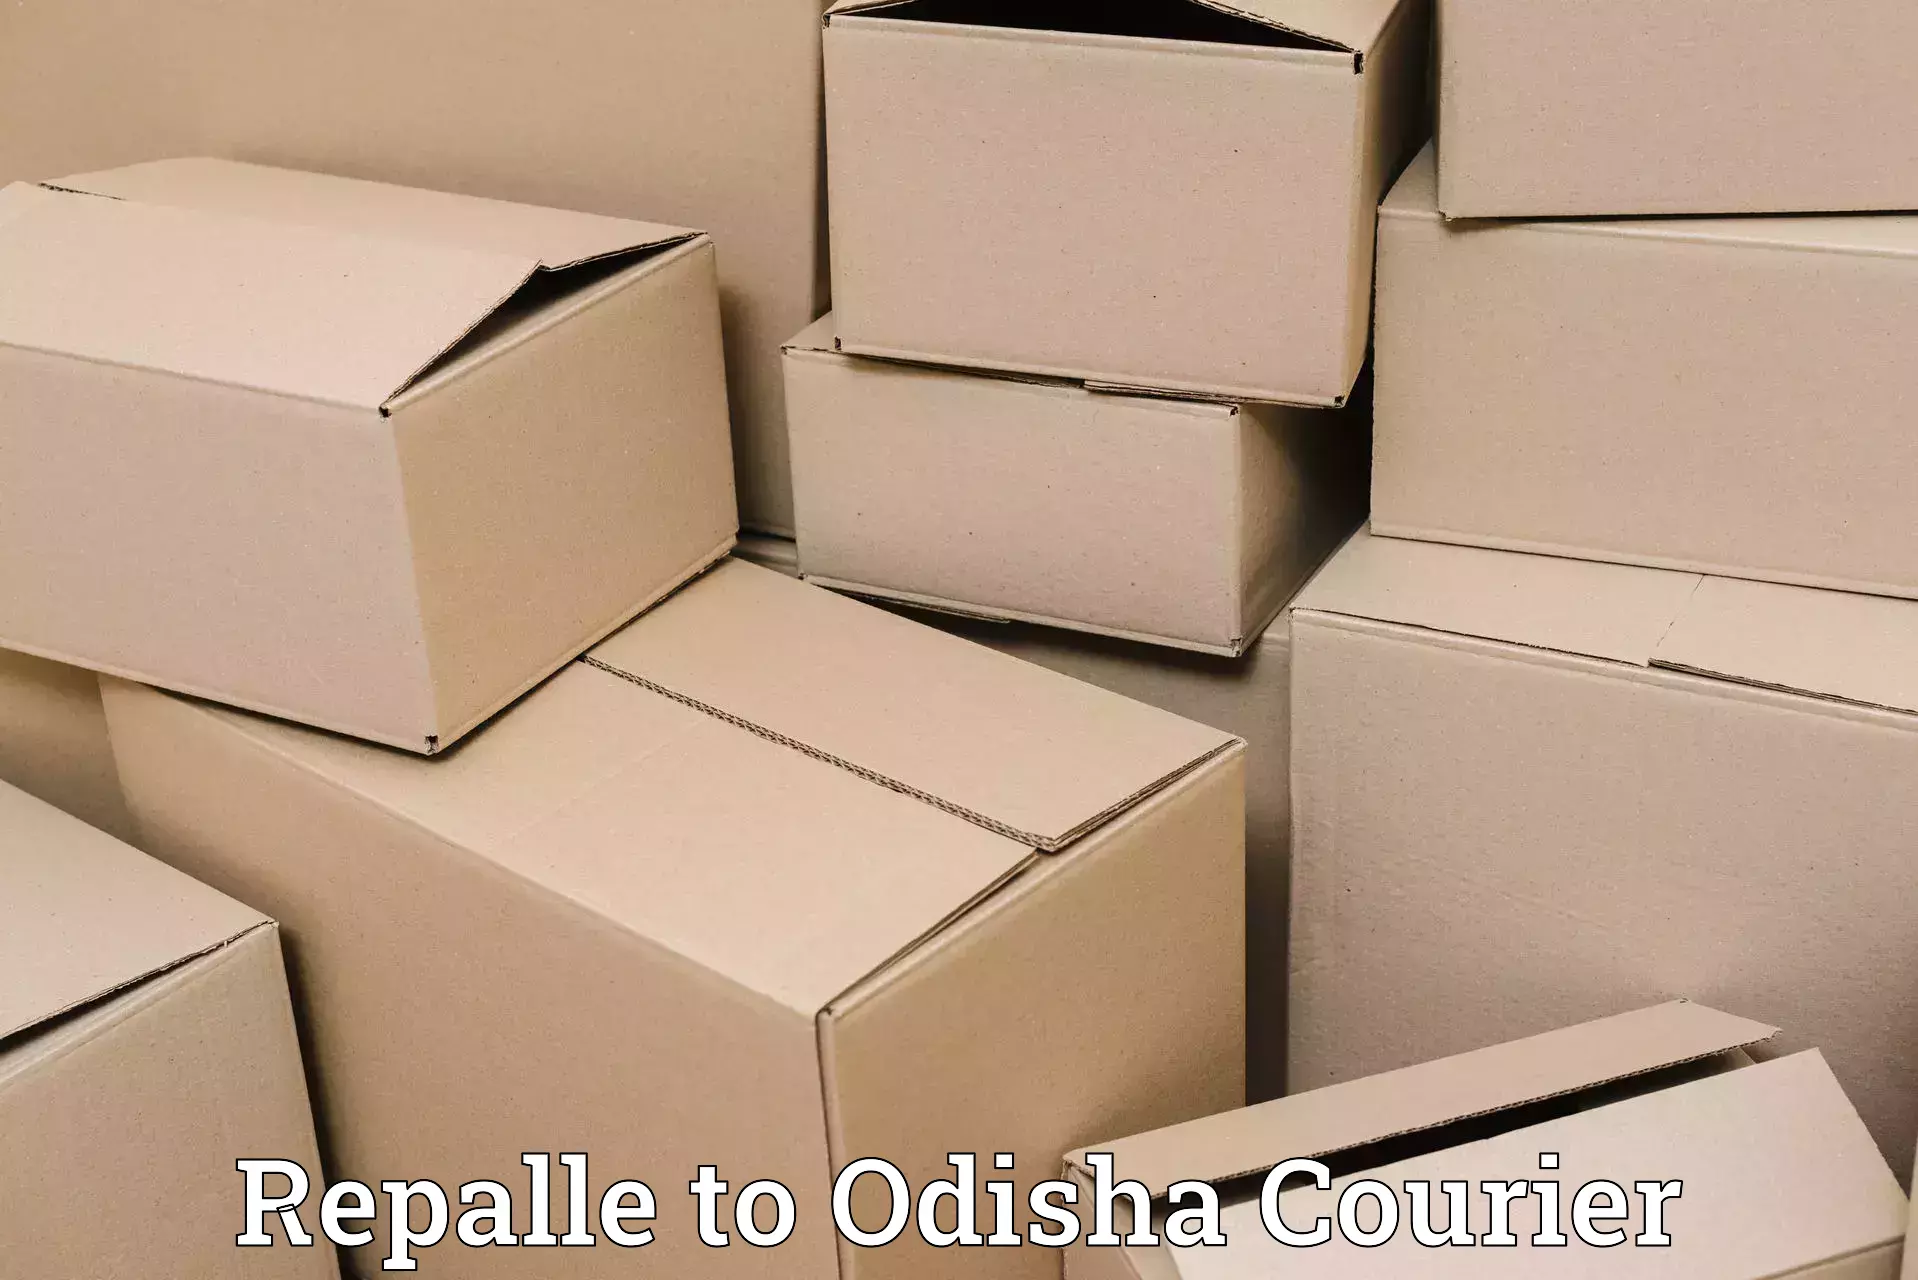 Luggage transport consulting Repalle to Odisha